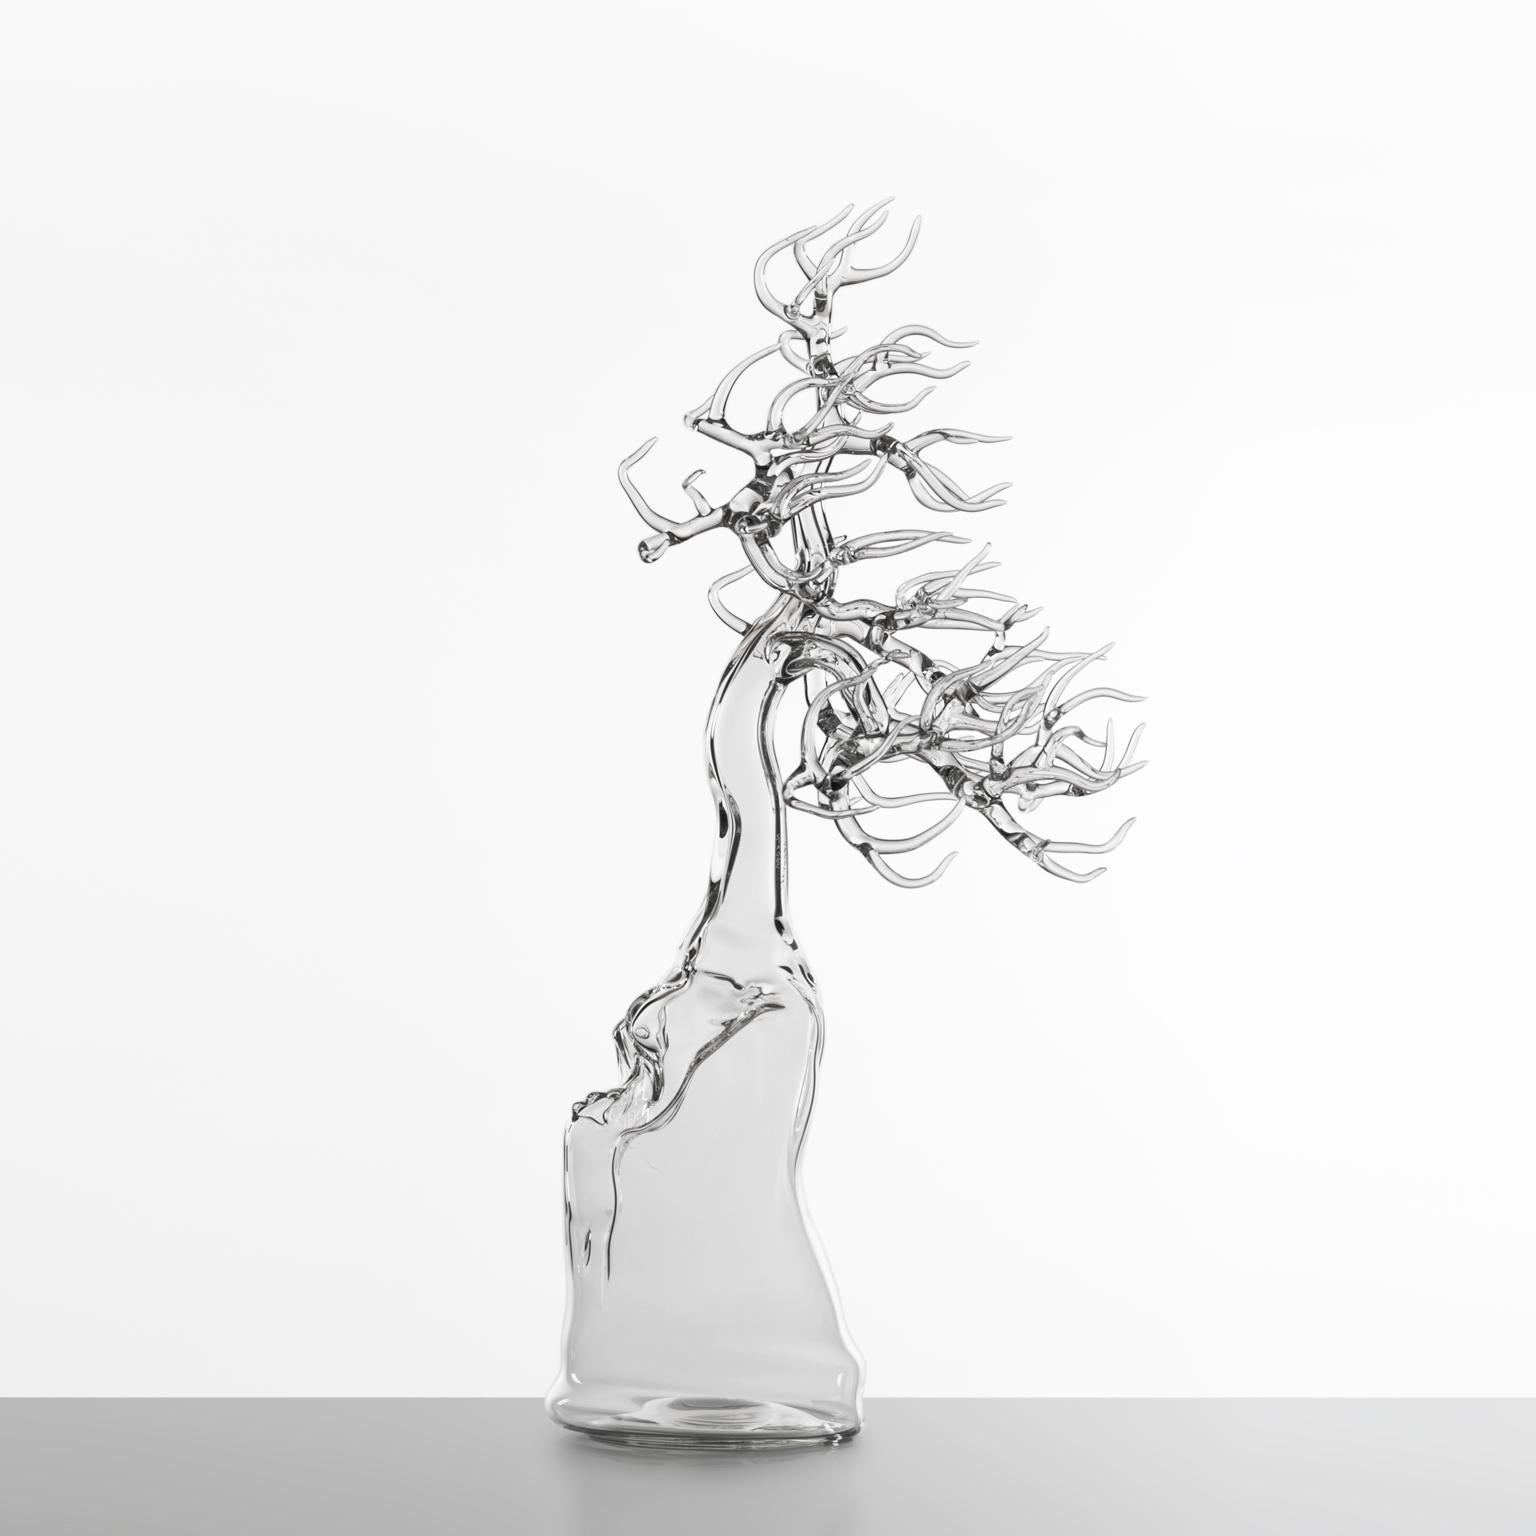 Introducing an exquisite Hand-Blown Glass Sculpture representing a bonsai tree, masterfully crafted by the renowned Italian artist Simone Crestani. This stunning sculpture encapsulates the delicate beauty and profound symbolism of a bonsai,